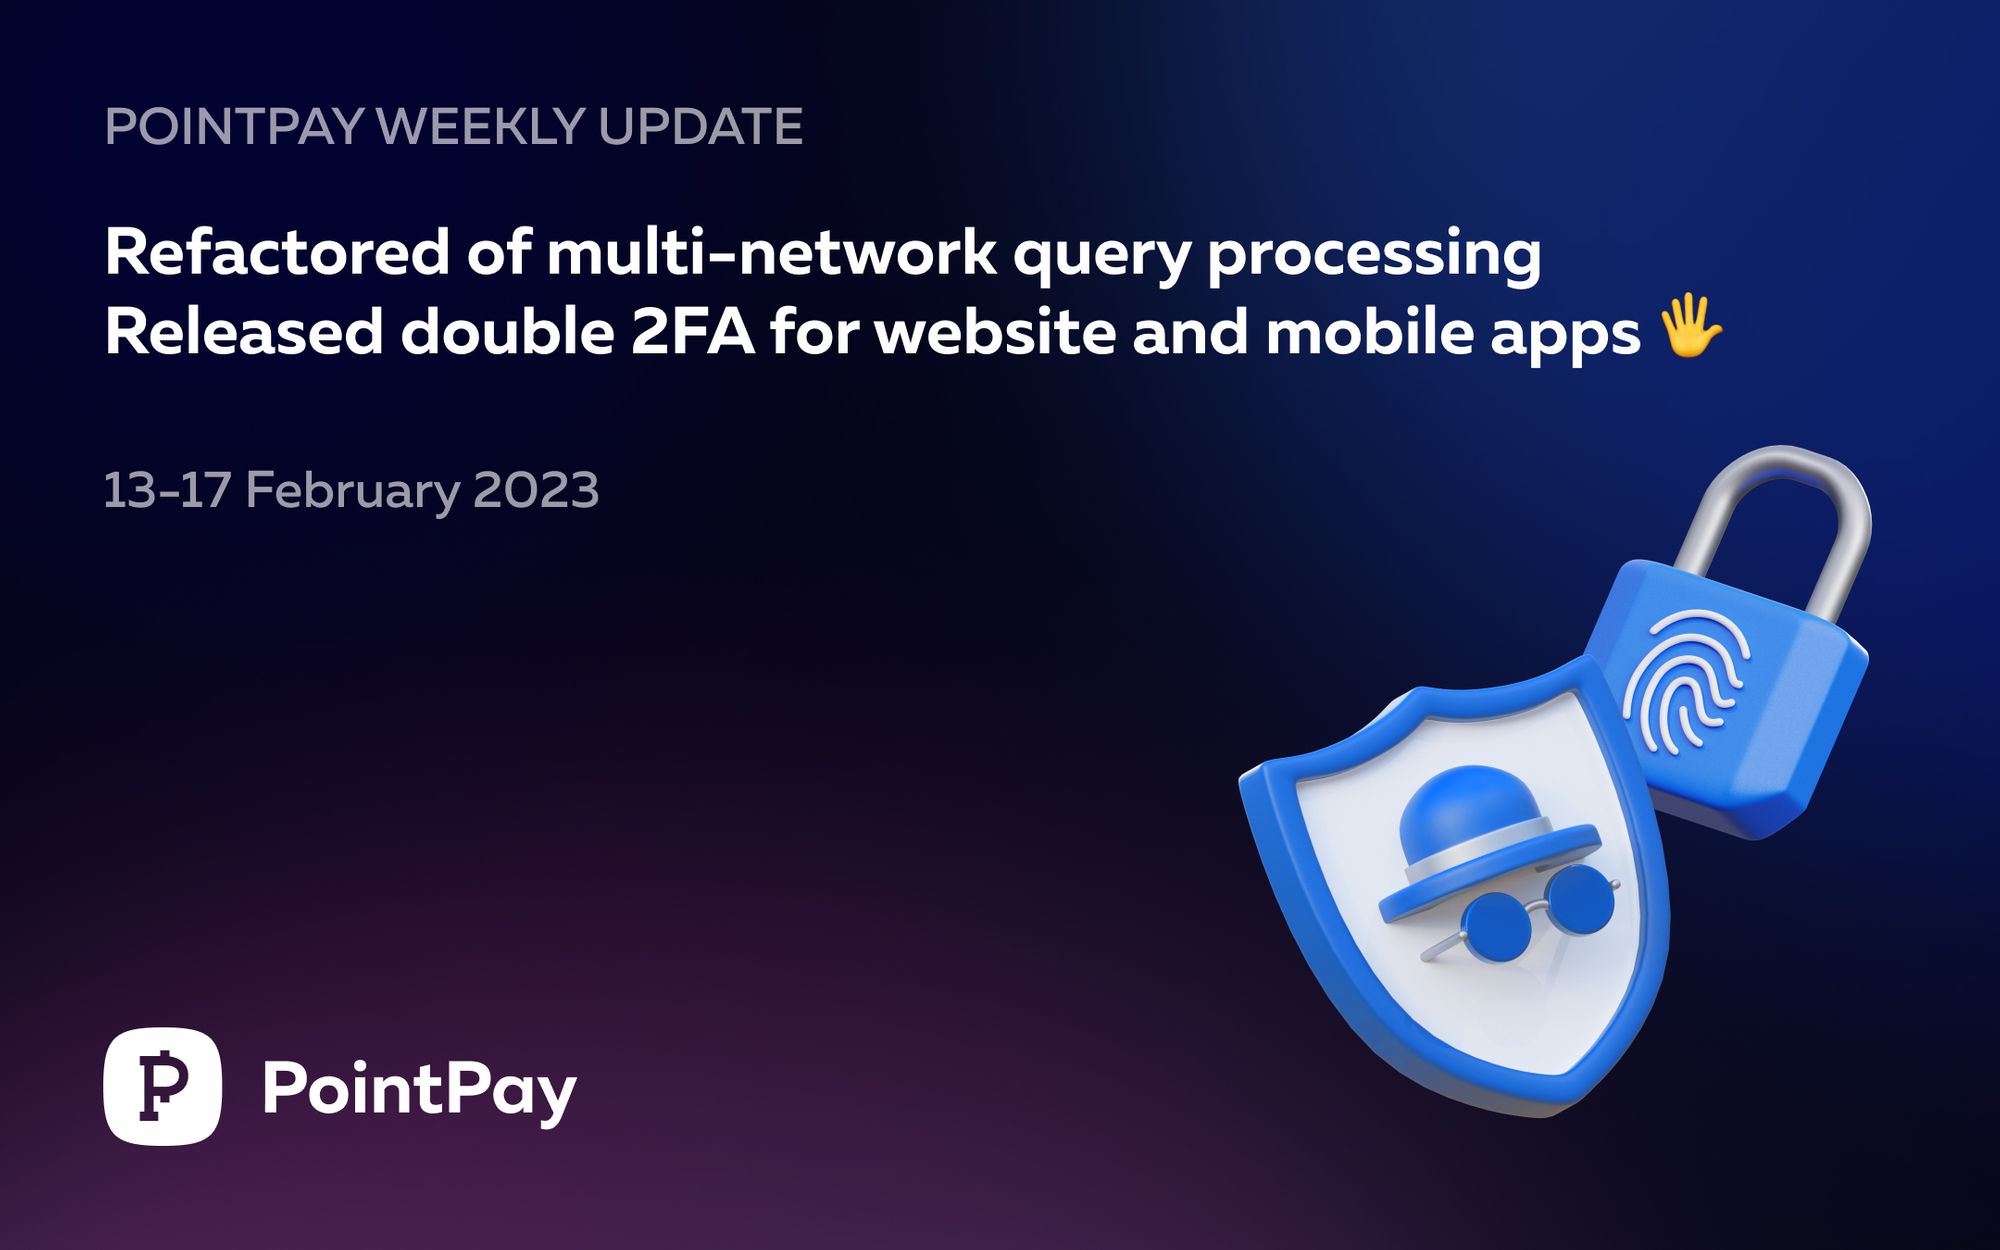 PointPay Weekly Update (13 - 17 February 2023)